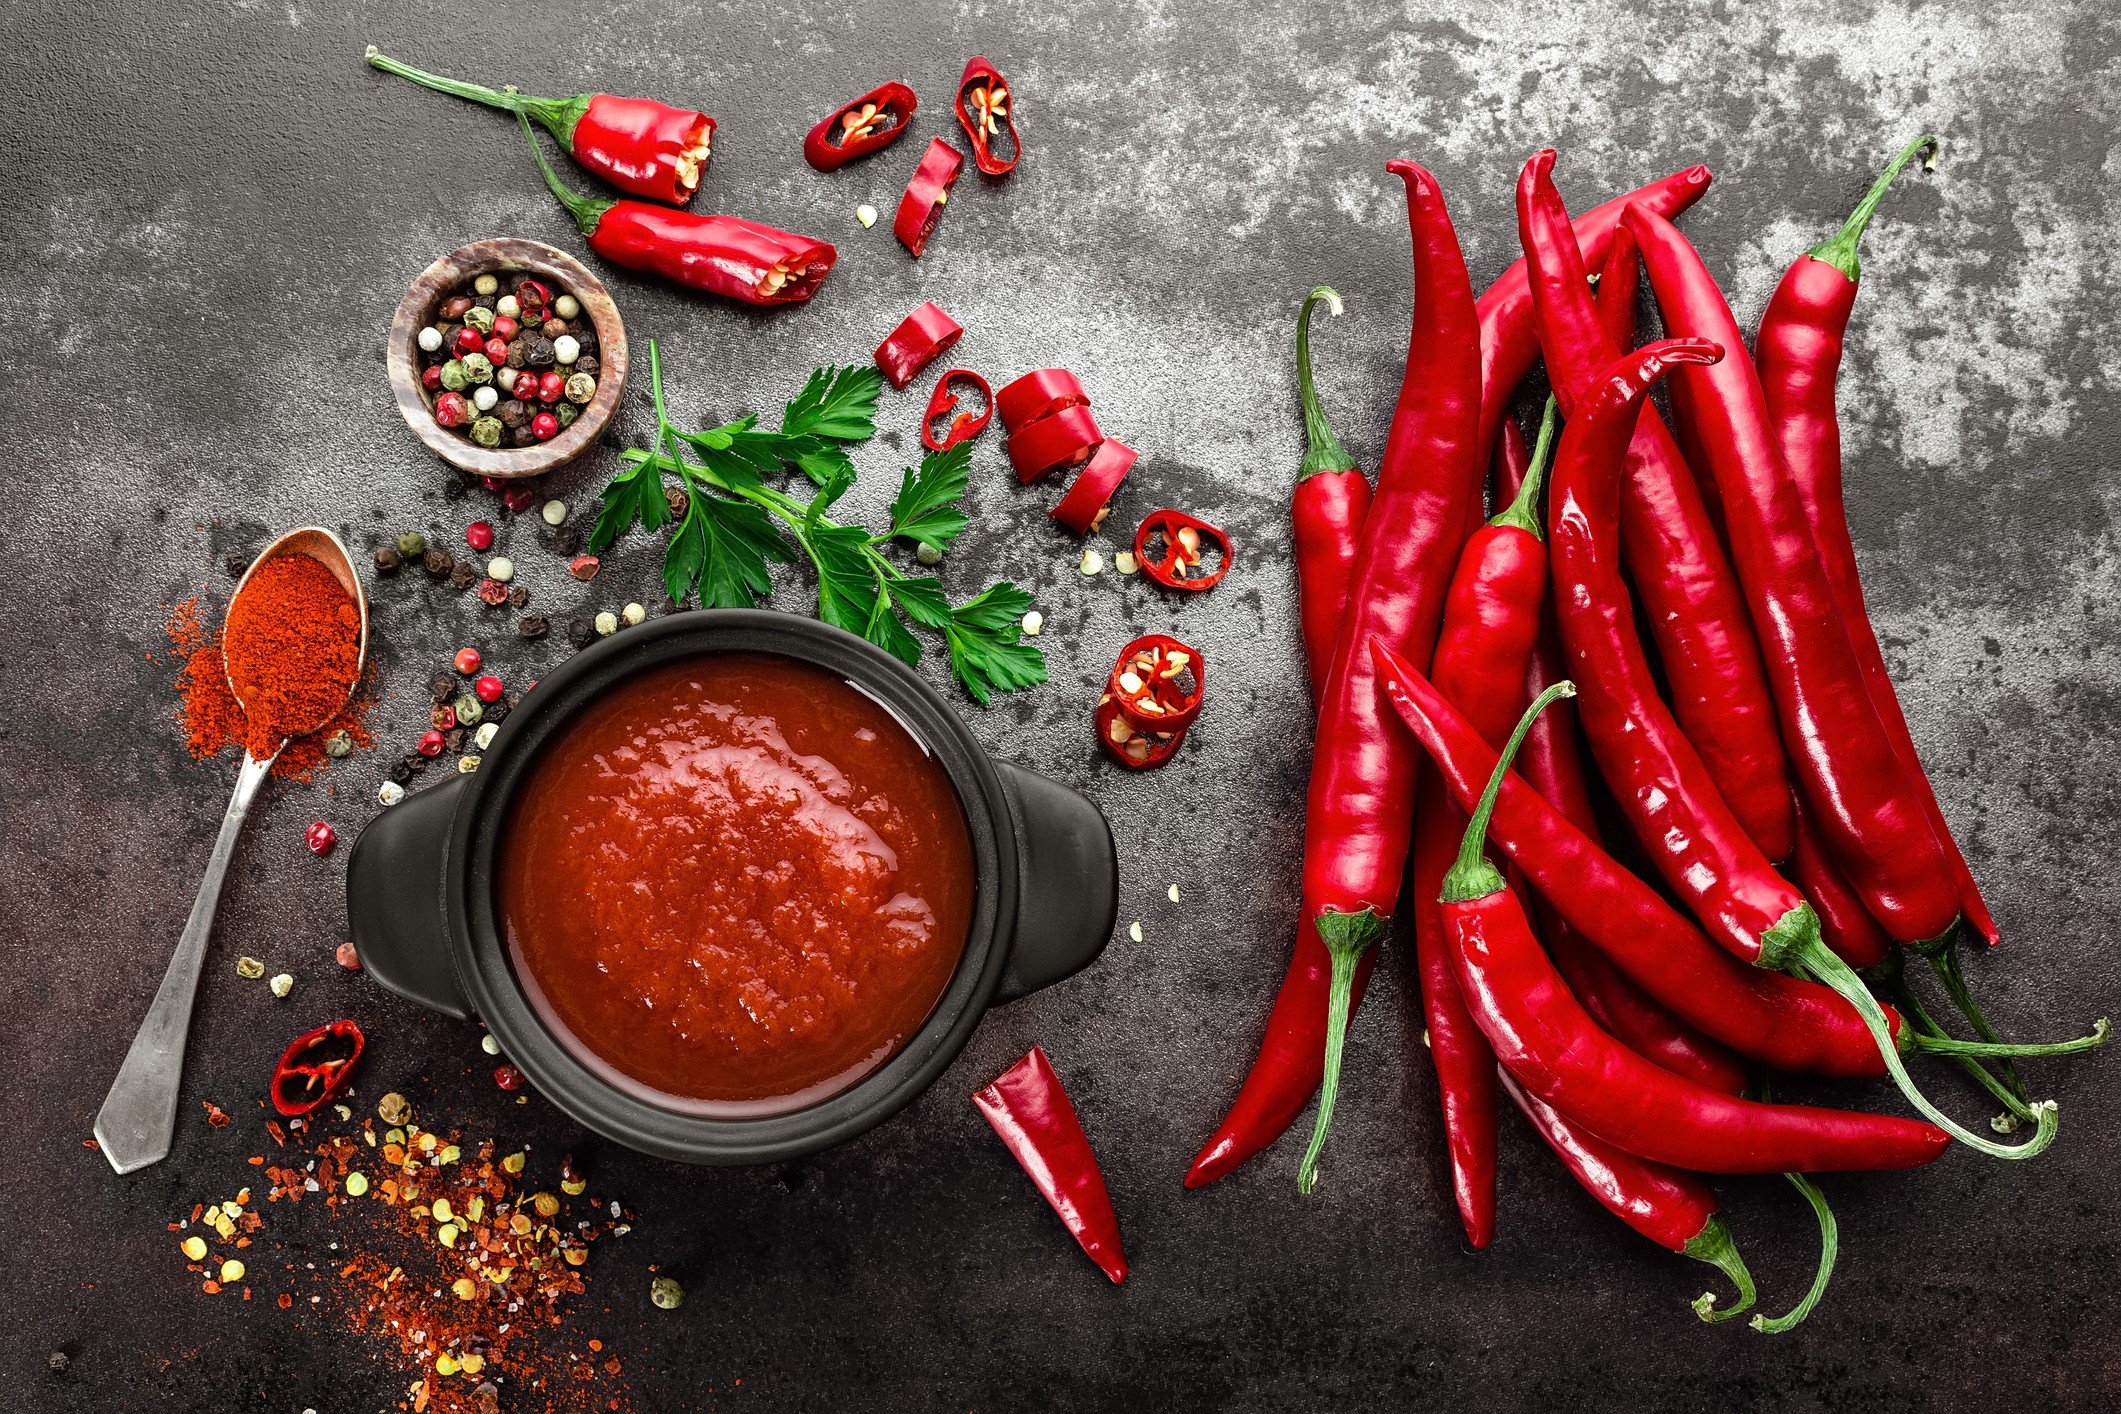 People have varying levels of tolerance to the spiciness emitted by chilli peppers.